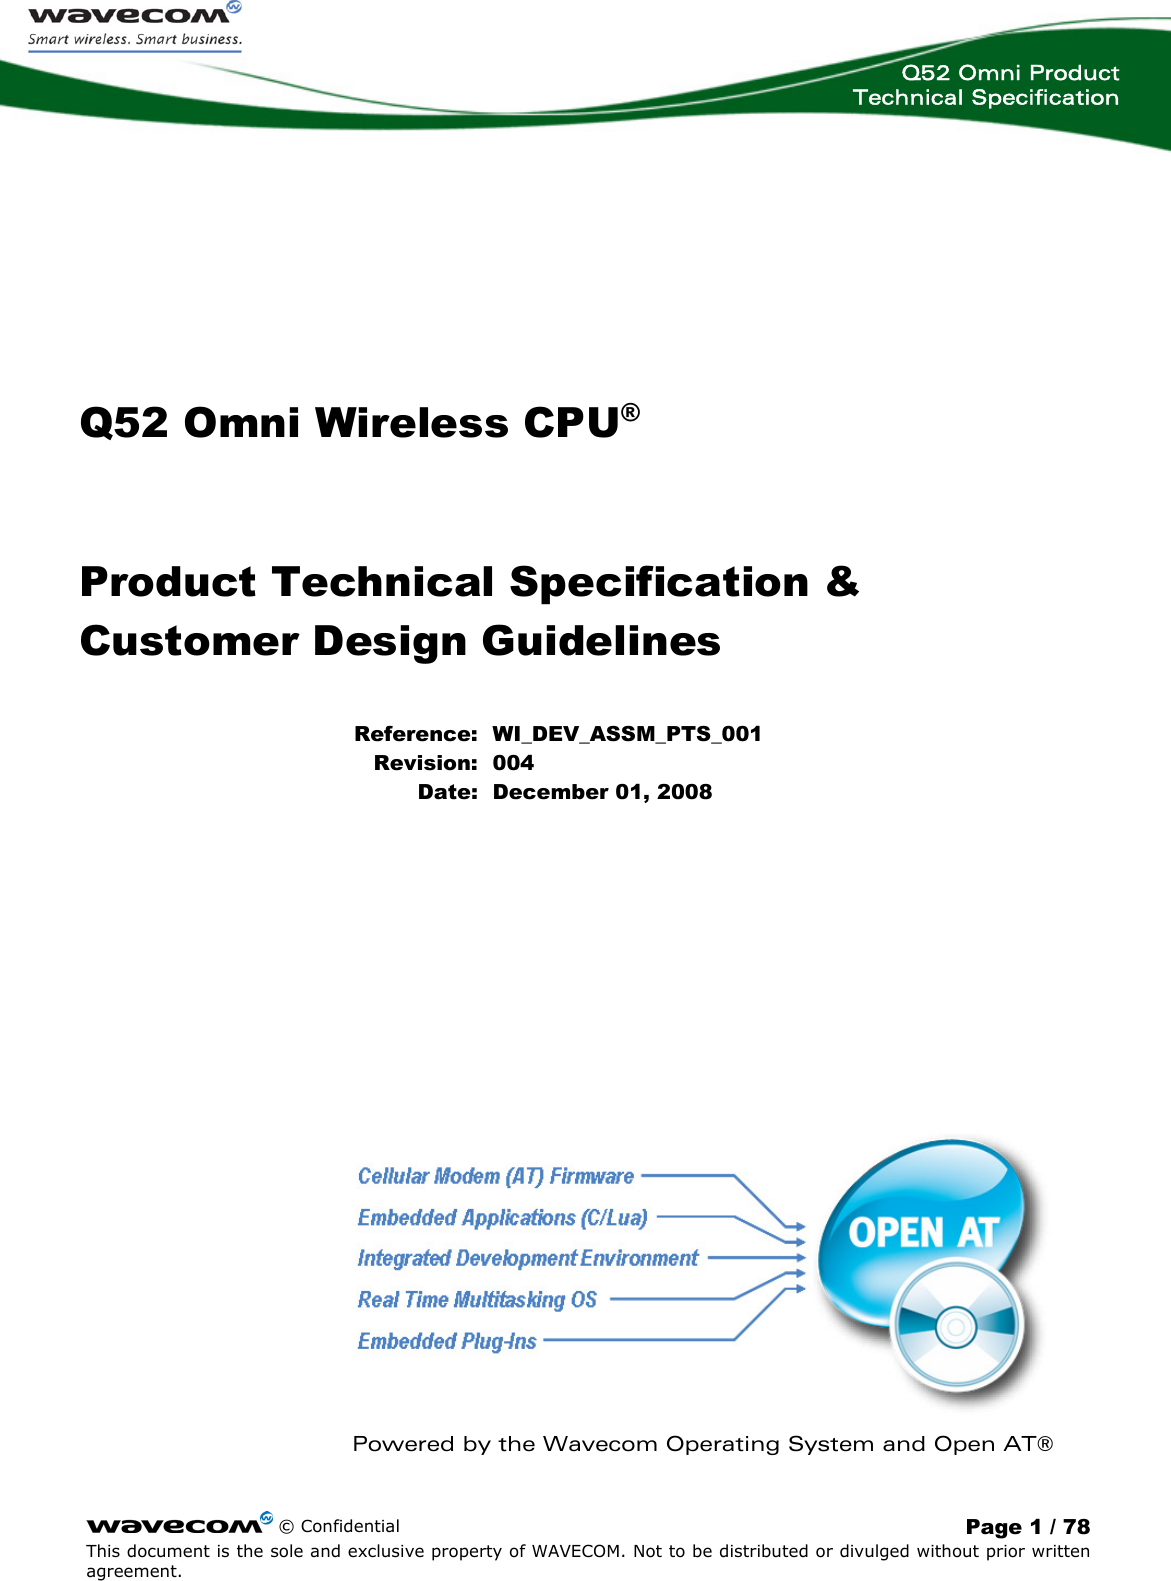  Q52 Omni Product Technical Specification     © Confidential  Page 1 / 78 This document is the sole and exclusive property of WAVECOM. Not to be distributed or divulged without prior written agreement.   Q52 Omni Wireless CPU® Product Technical Specification &amp; Customer Design Guidelines Reference: WI_DEV_ASSM_PTS_001 Revision: 004 Date: December 01, 2008         Powered by the Wavecom Operating System and Open AT® 